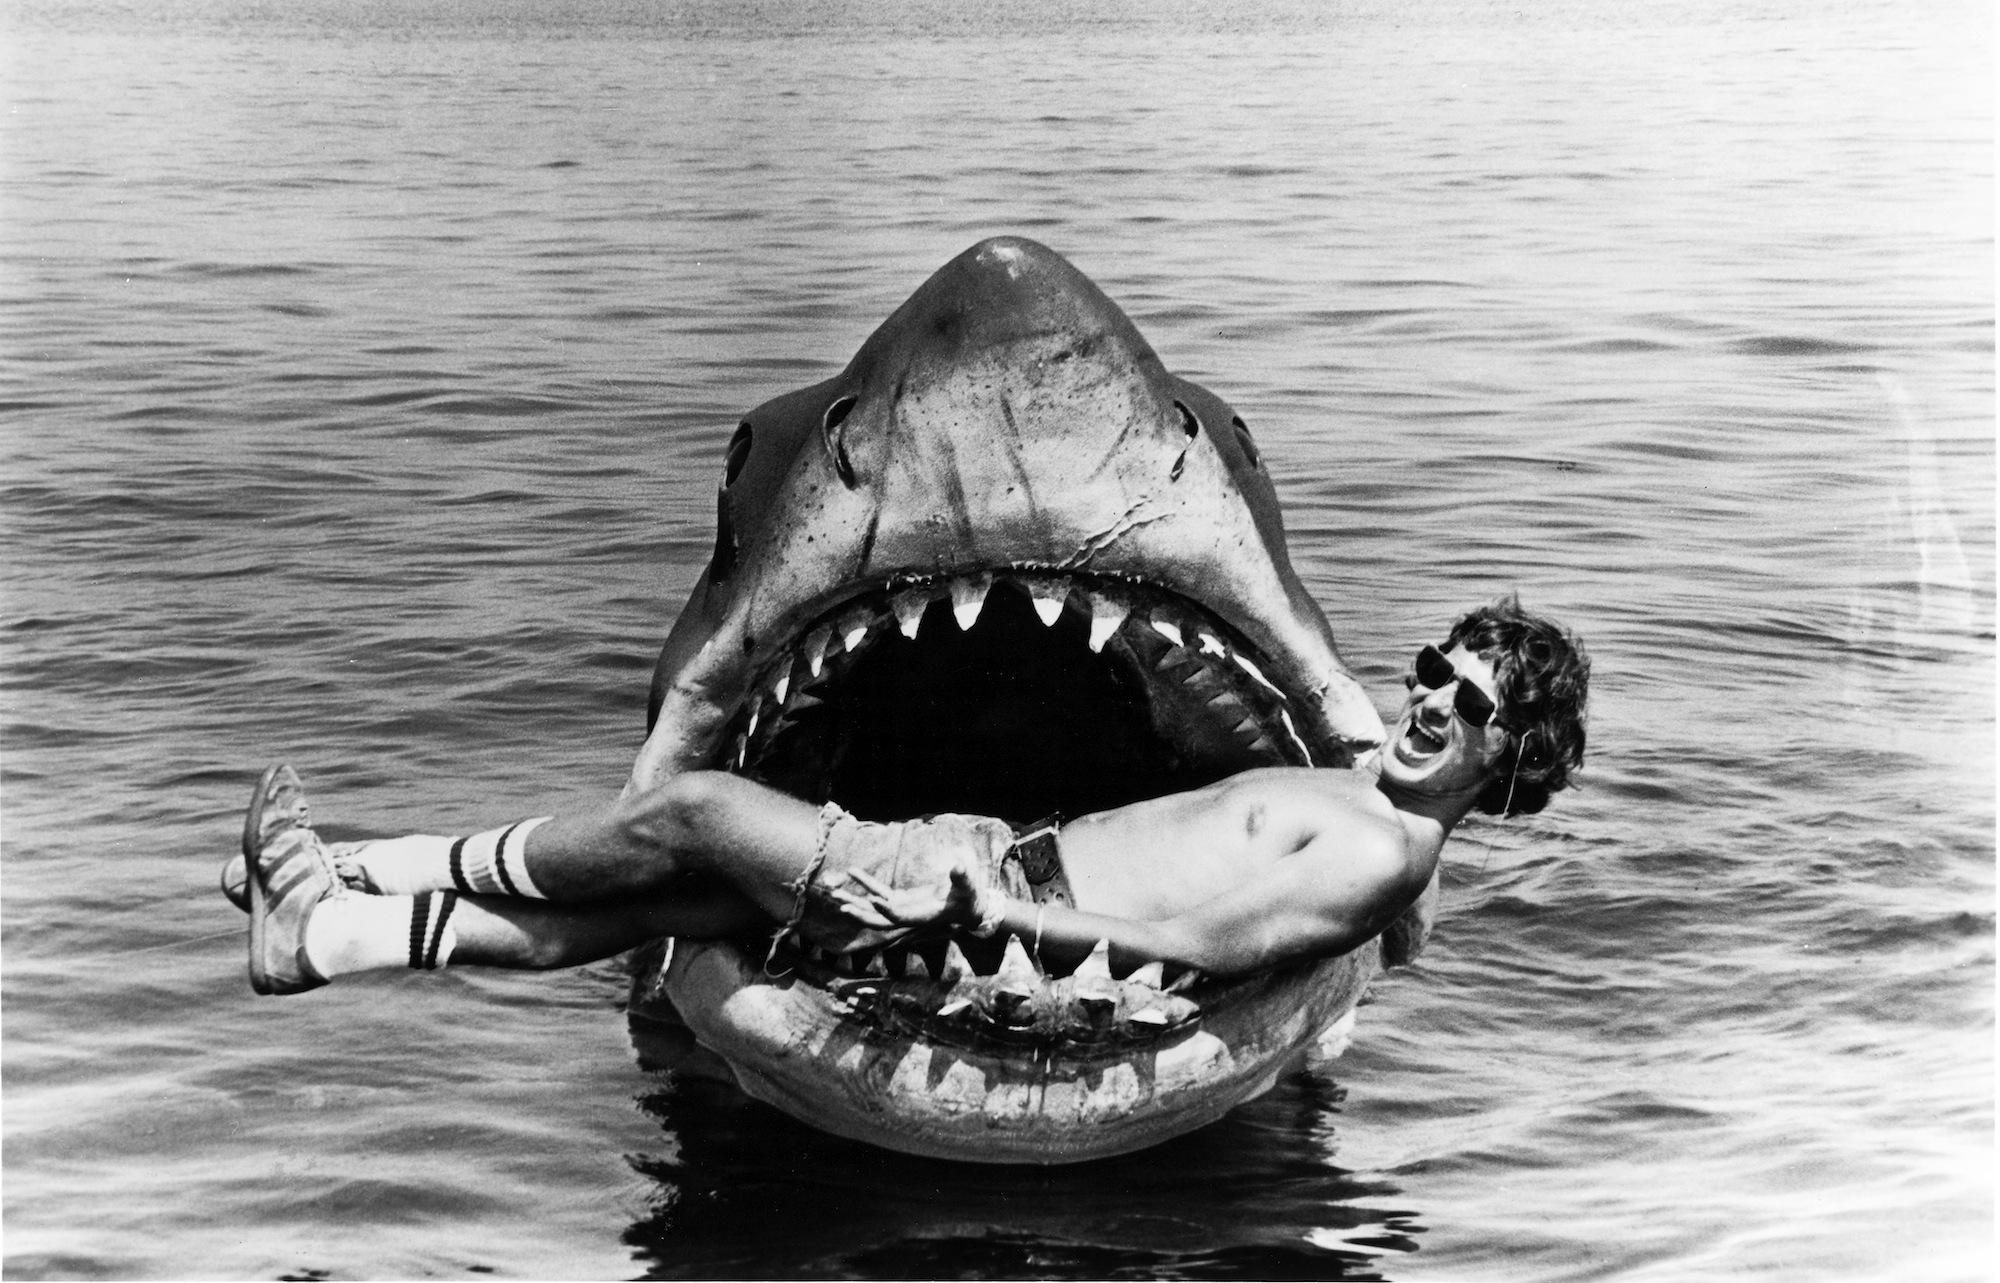 Wishing a very happy 74th birthday to the great Steven Spielberg!

What\s your favorite score from a Spielberg film? 